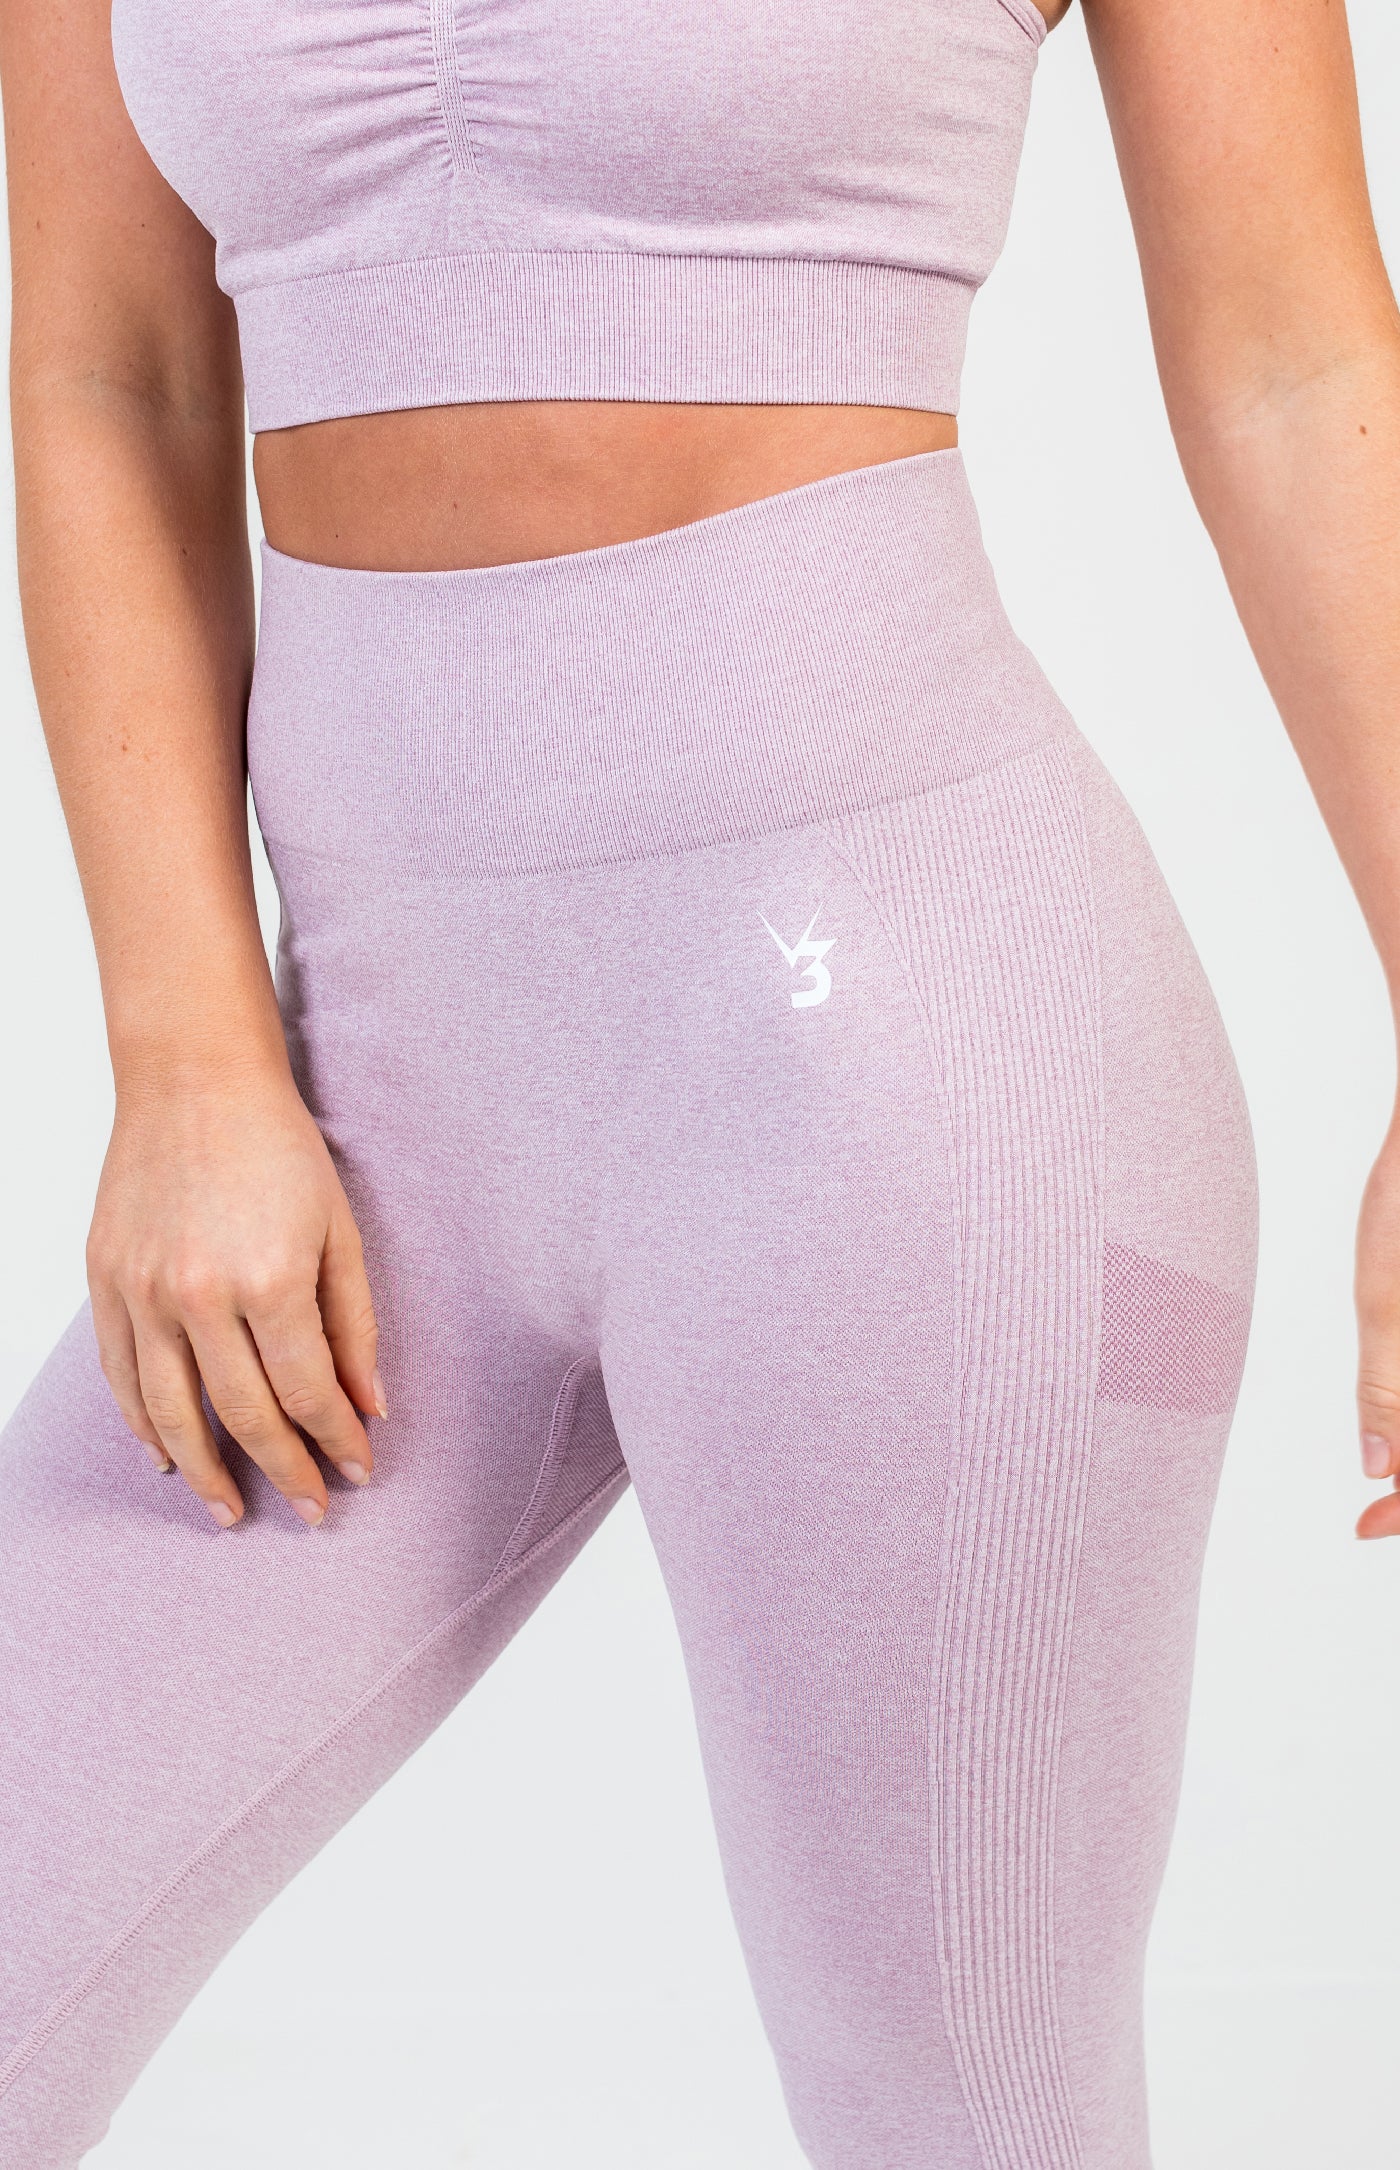 V3 Apparel womens Define Lilac marl scrunch bum shaping workout gym leggings and squat proof fitness tights with high waisted and ruched seam for running, yoga, gym bodybuilding and training.